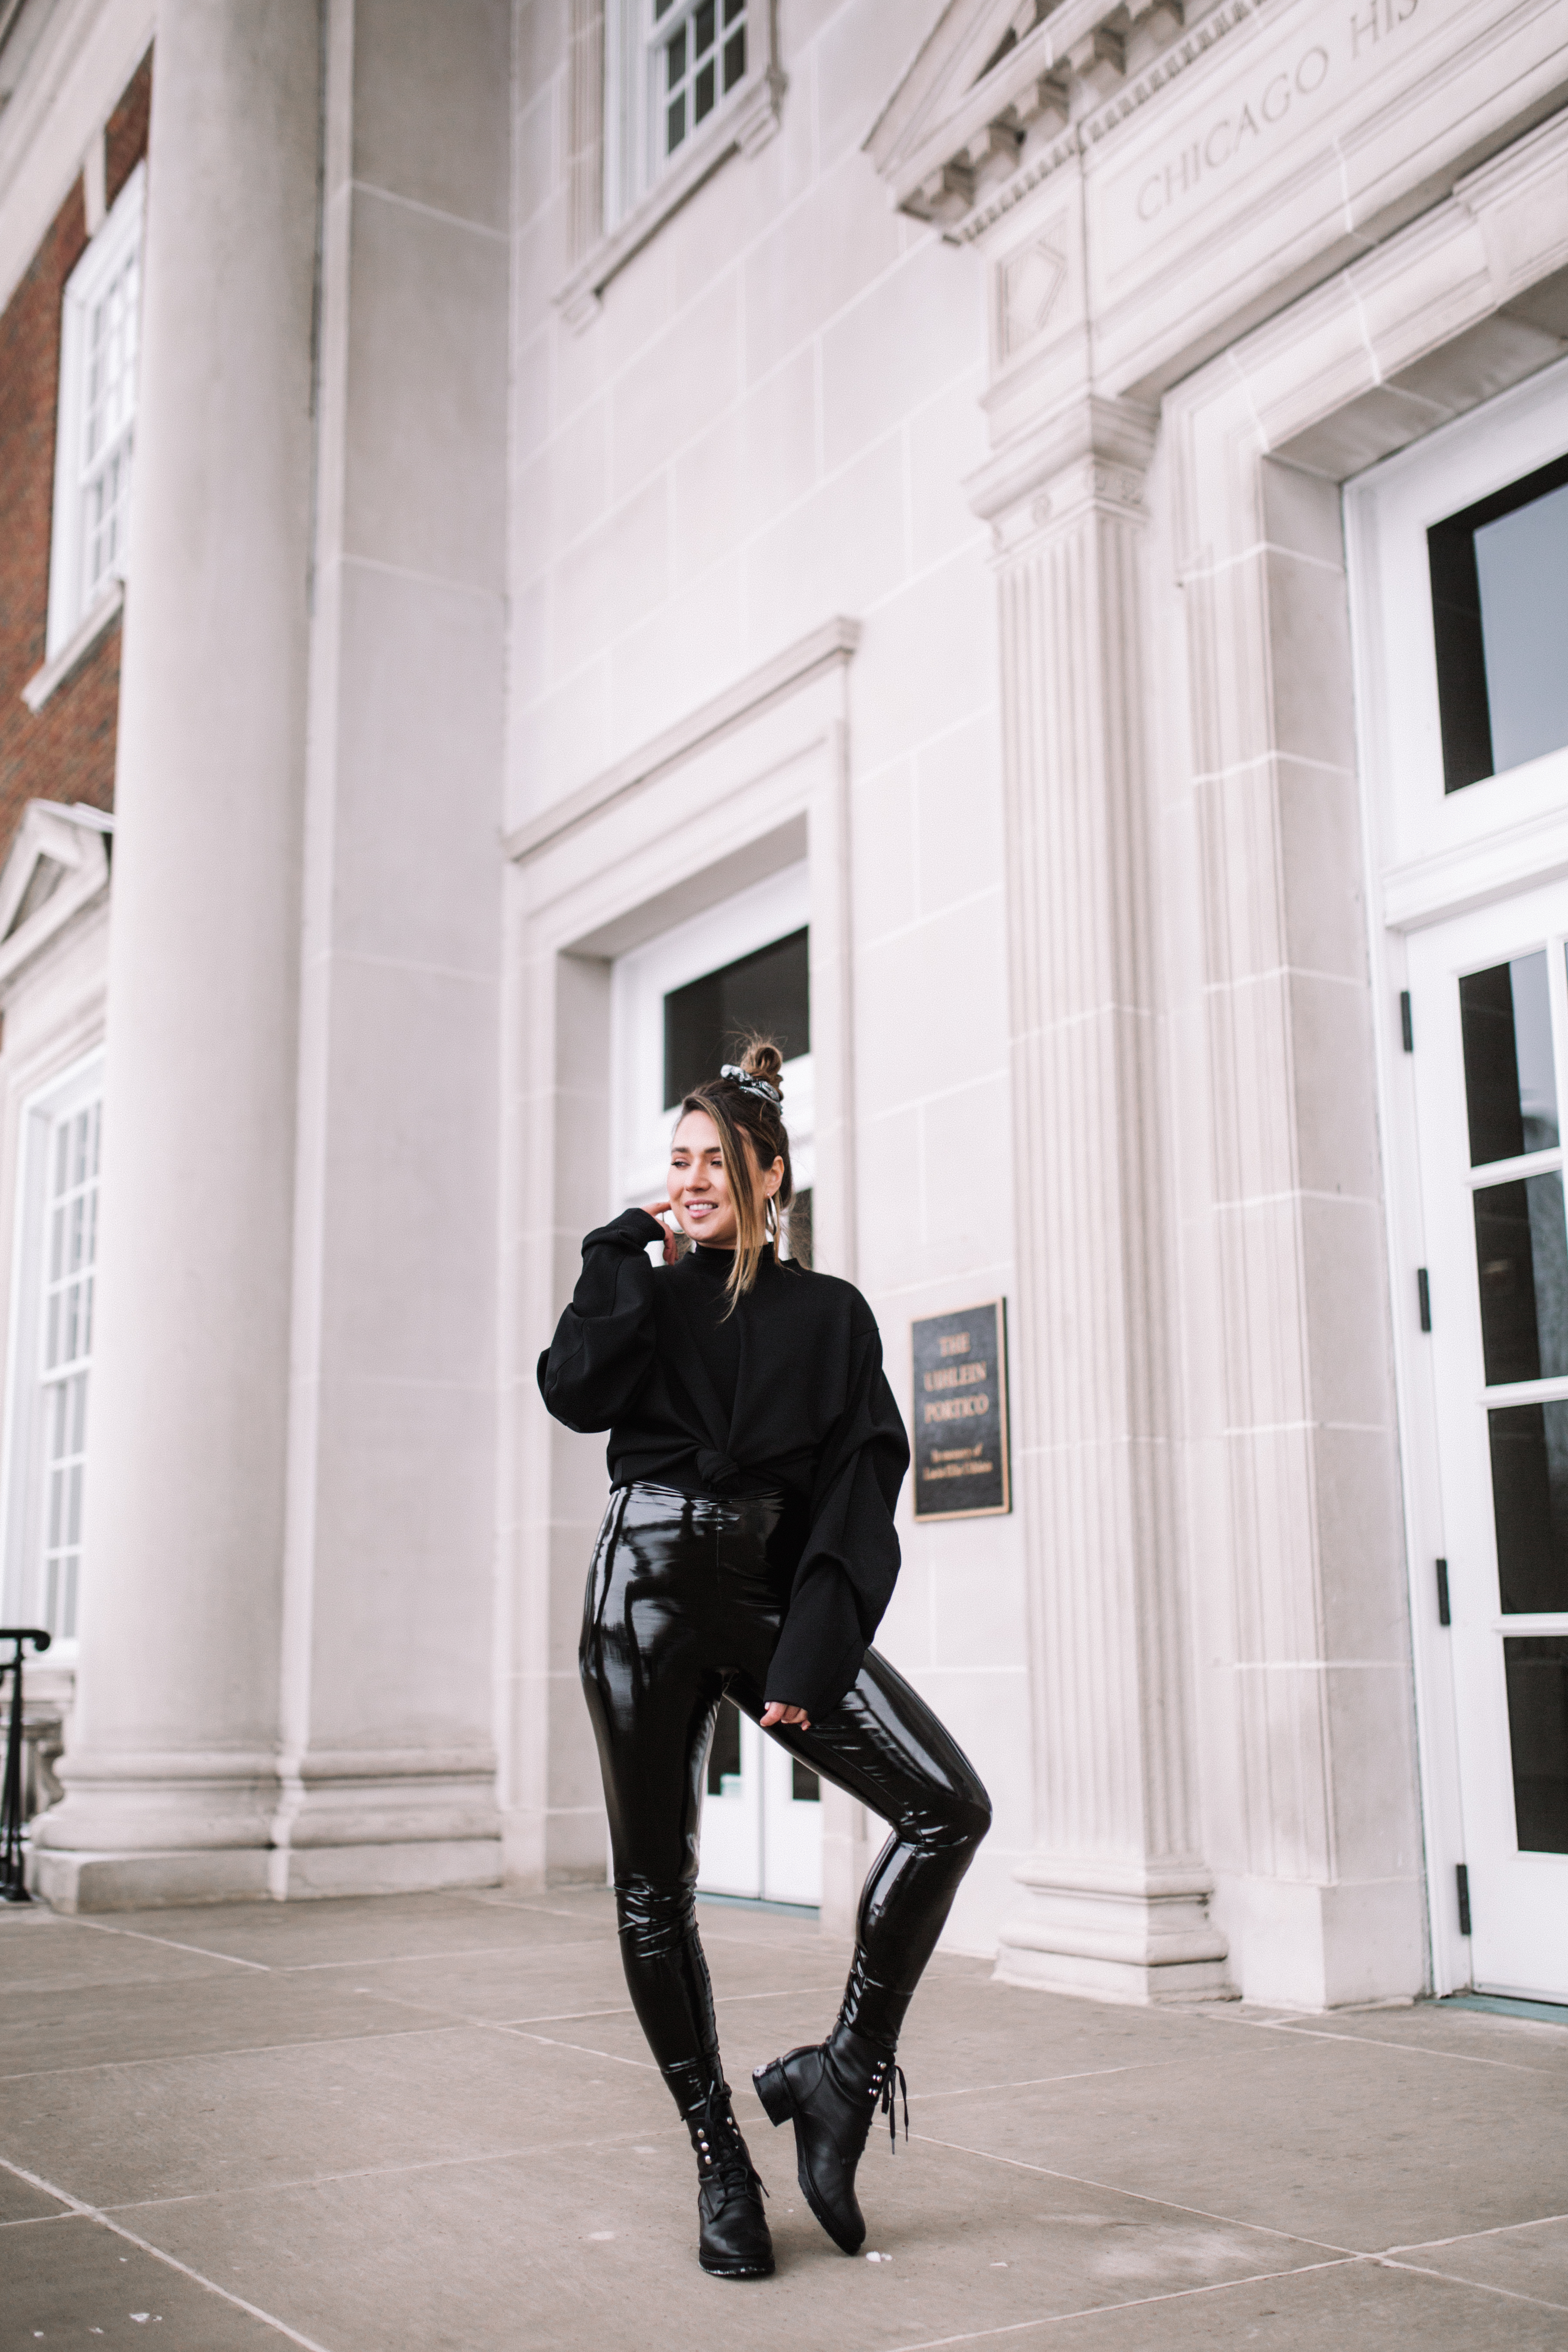 cool-girl-nike-outfit-commando-patenet-leather-legging-combat-boot-all-black-layers-nike-windbreaker